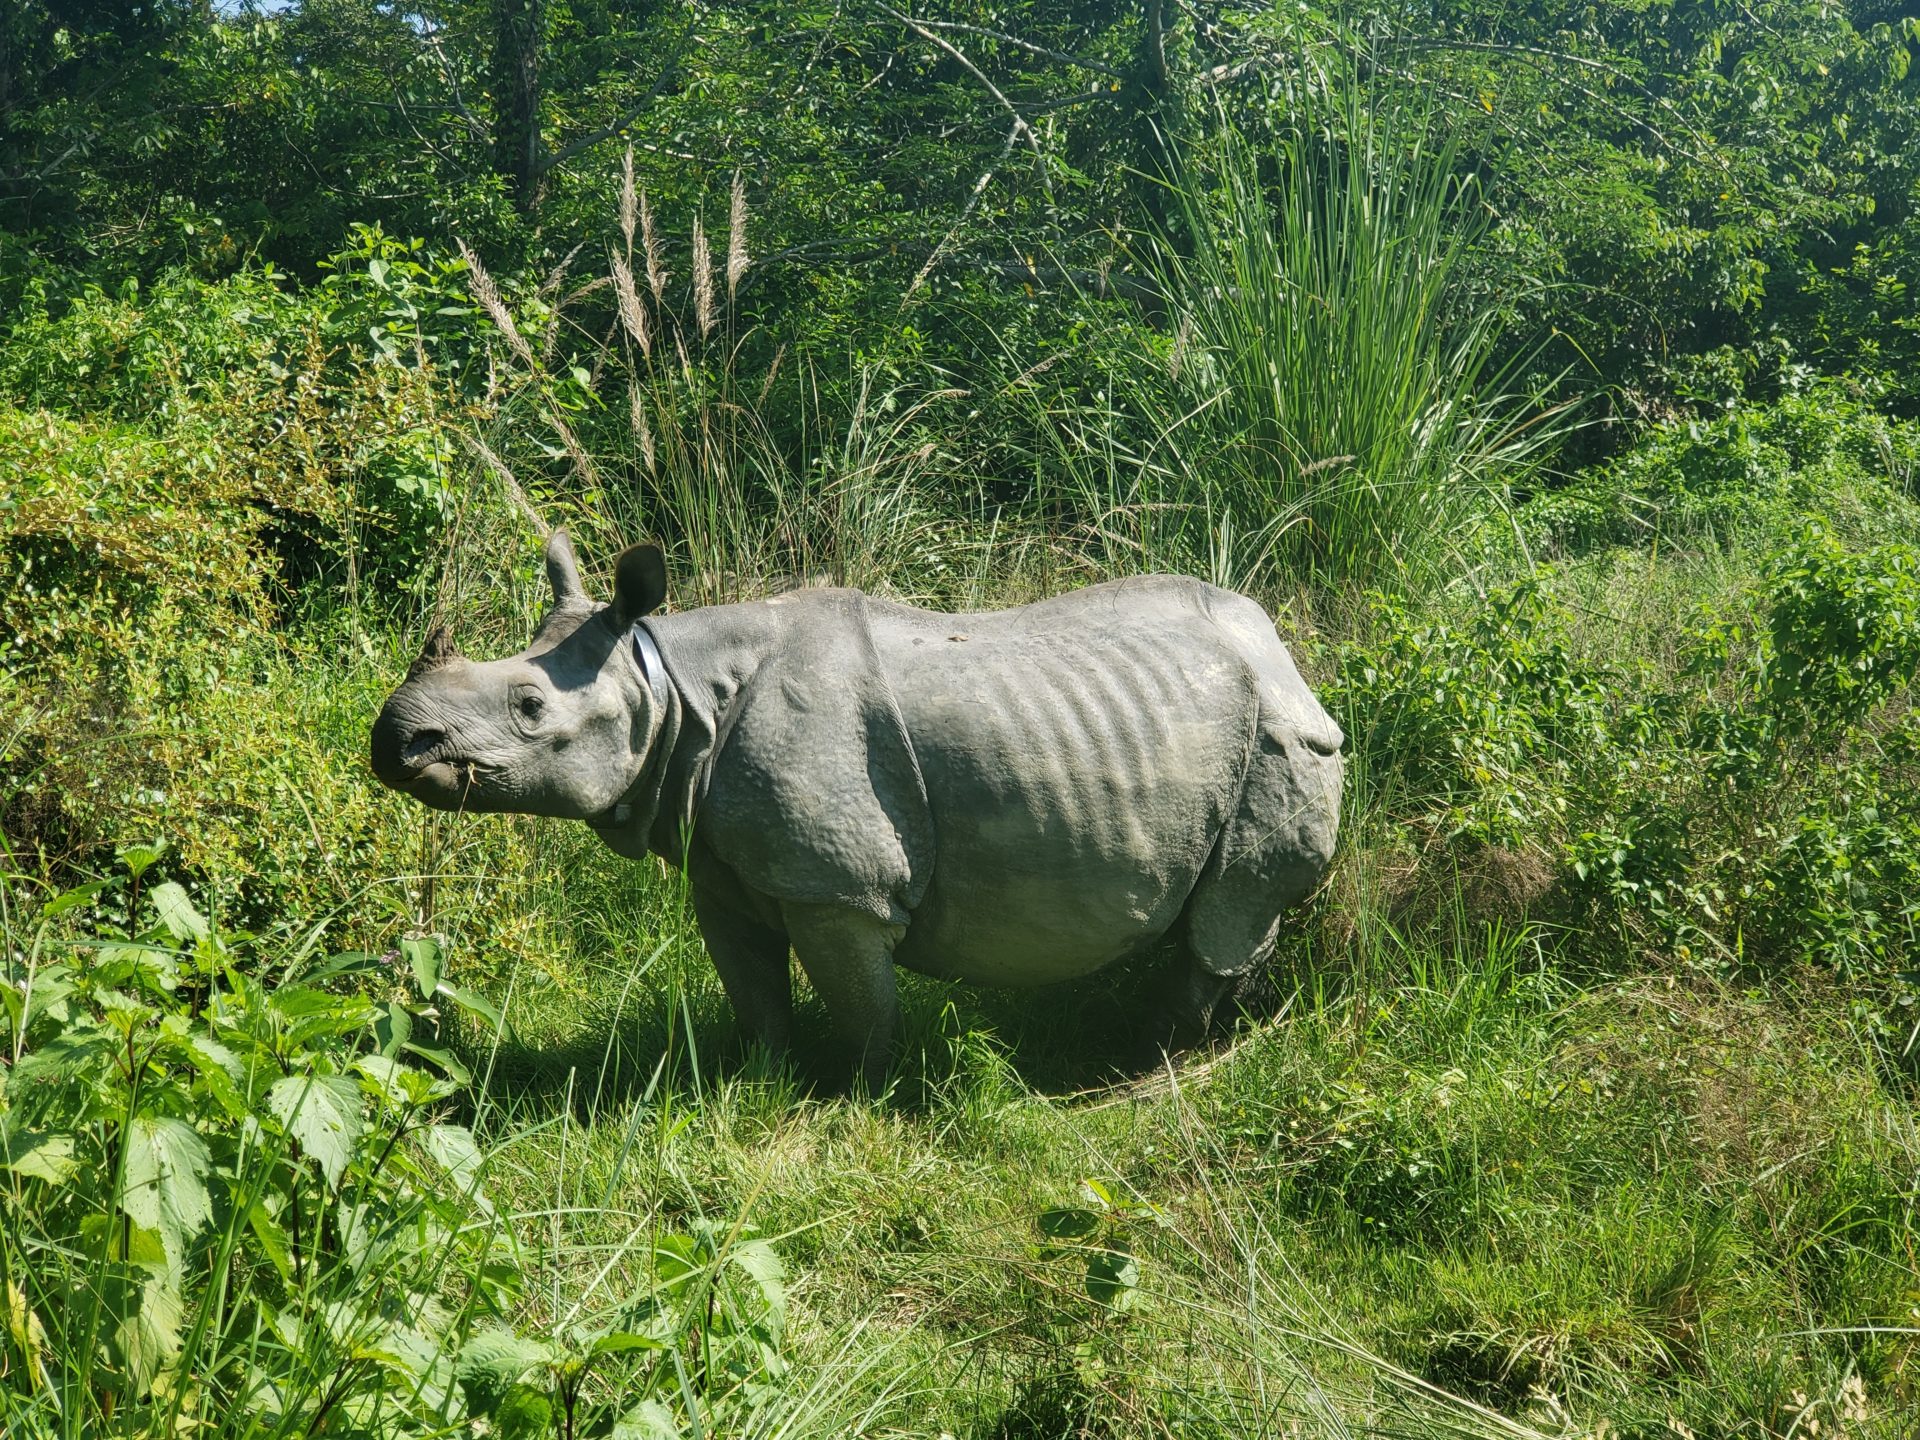 a rhinoceros standing in the grass with Kaziranga National Park in the background